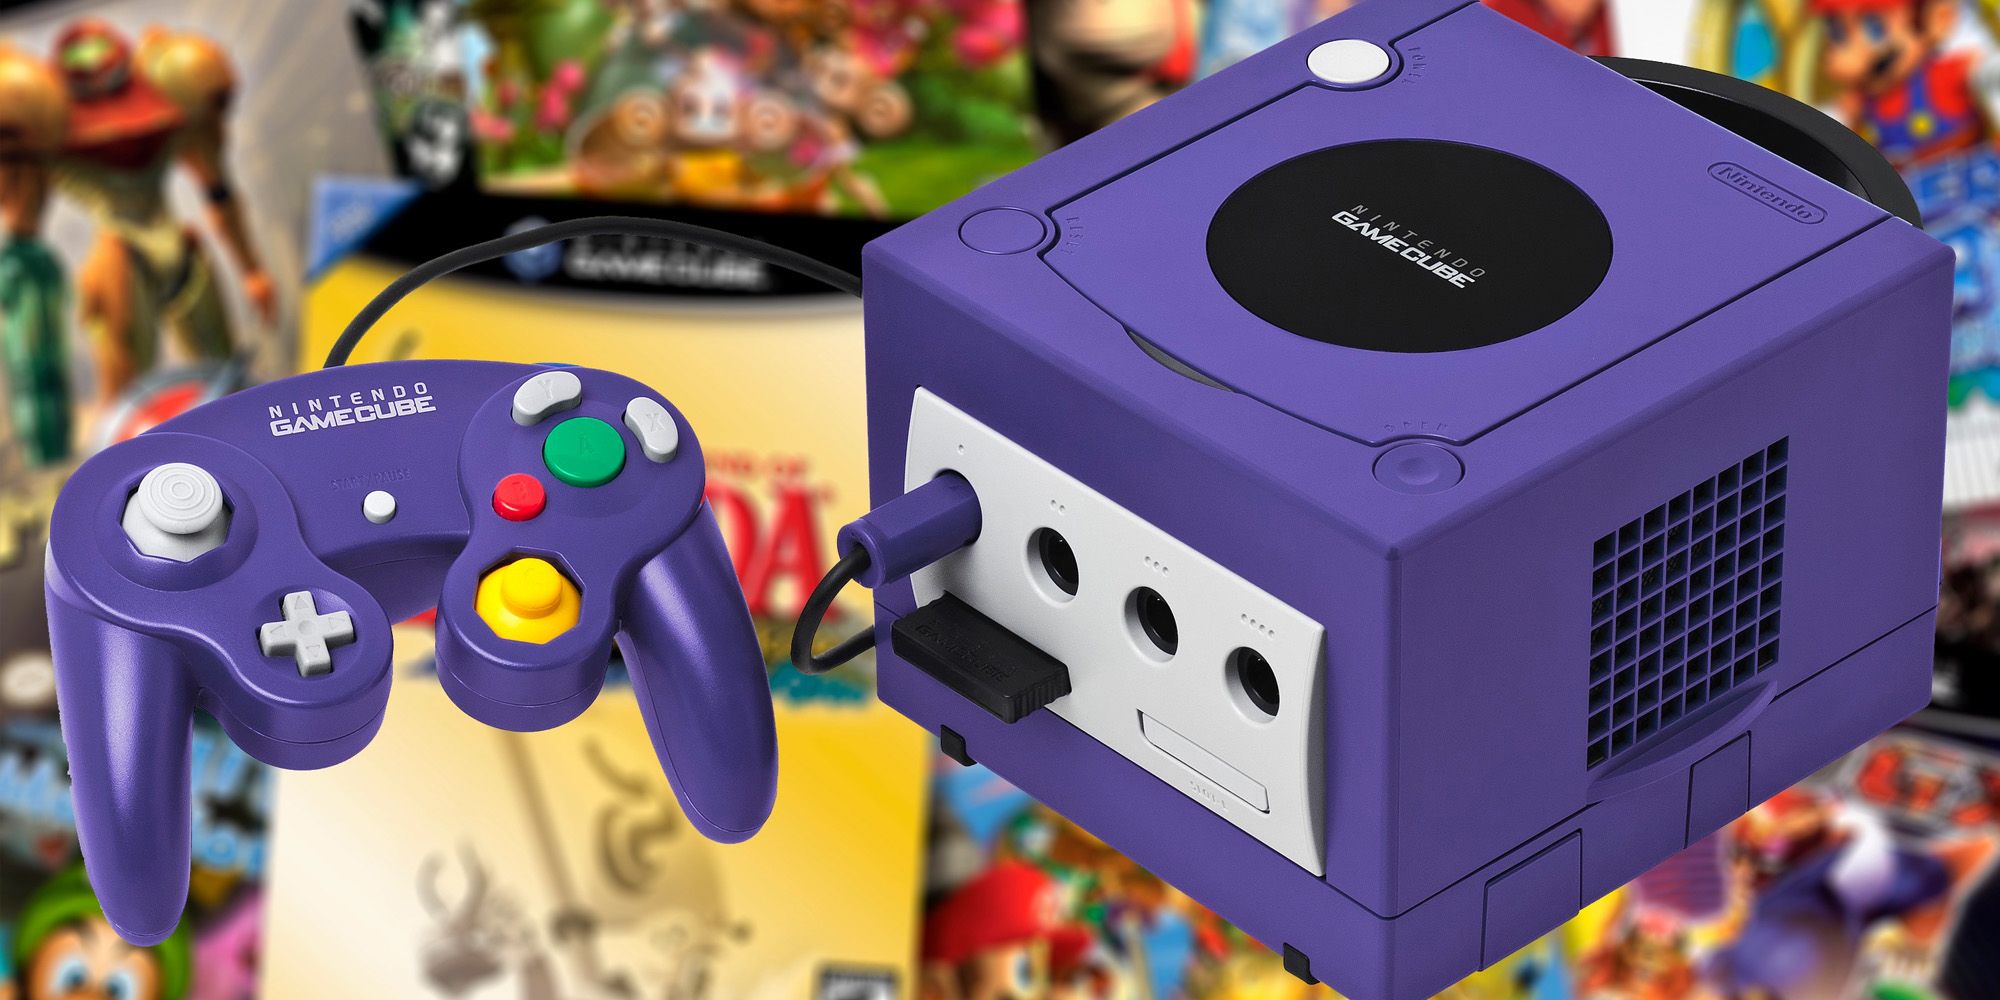 An image of a GameCube console and controller in front of a Nintendo background